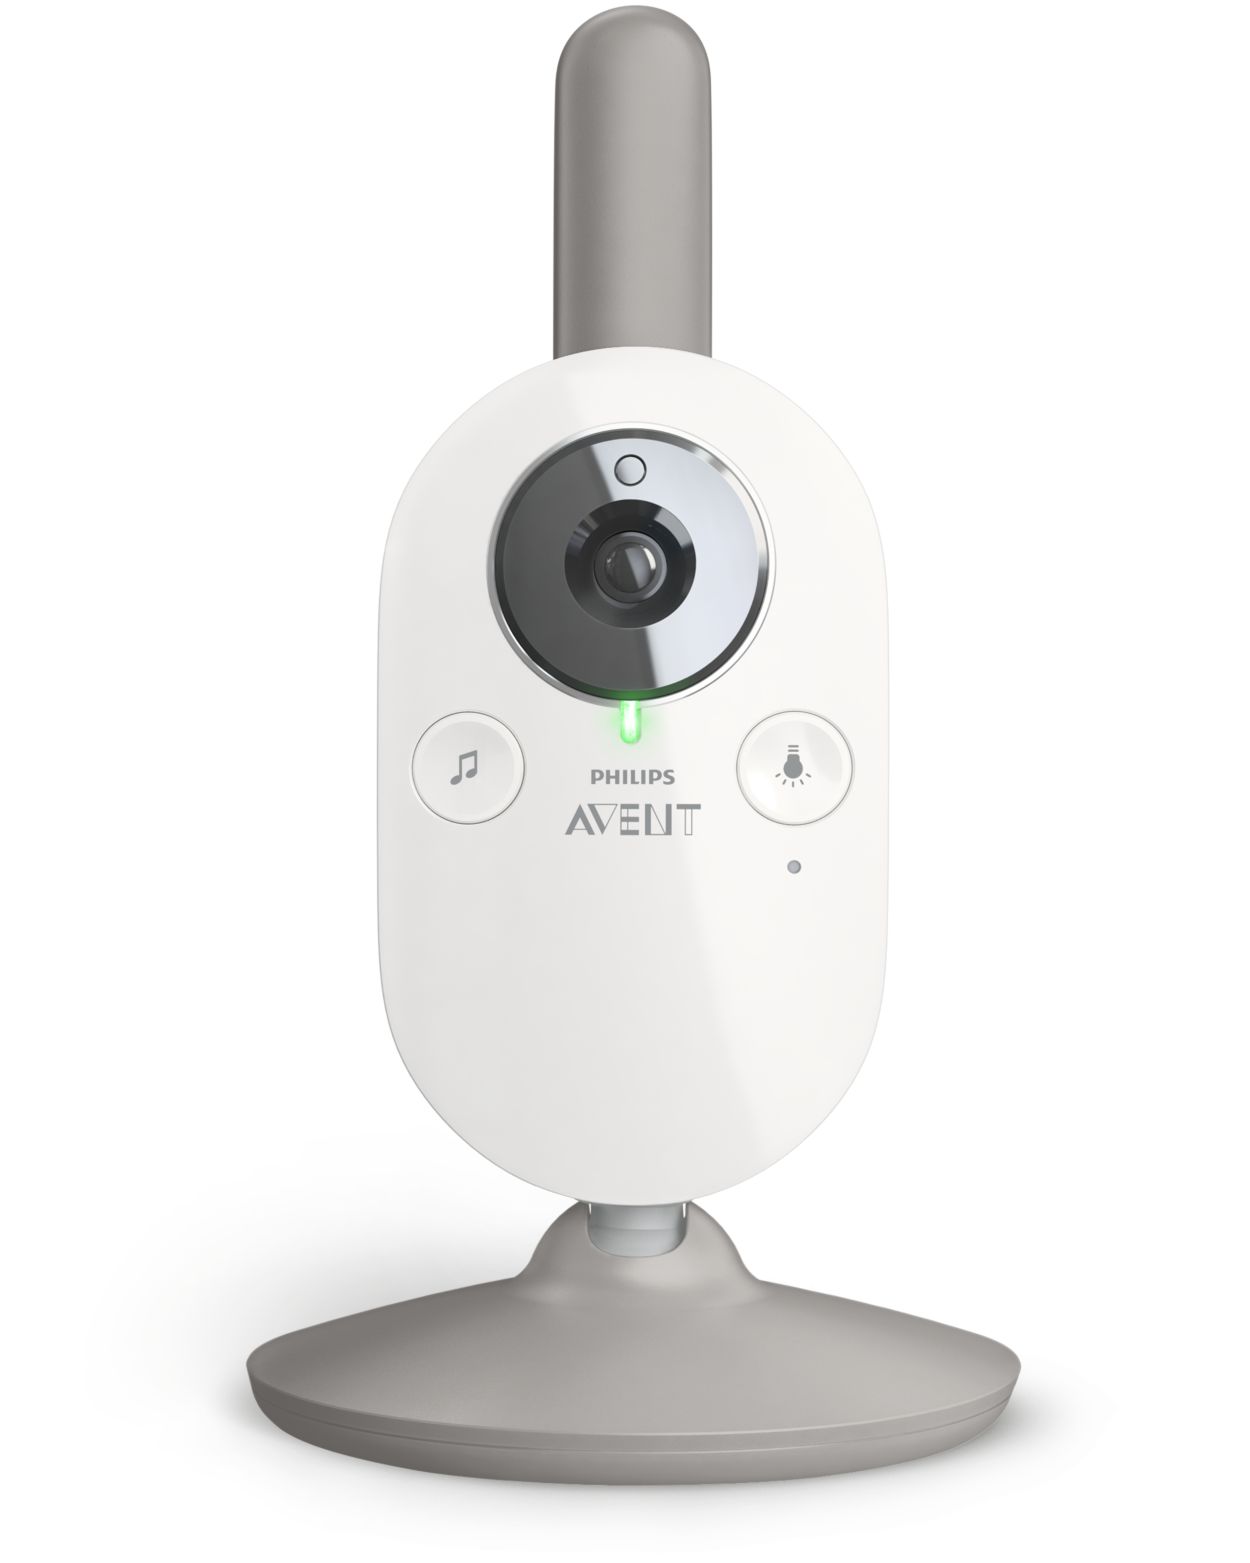 Philips Avent digital video baby monitors recalled due to burn